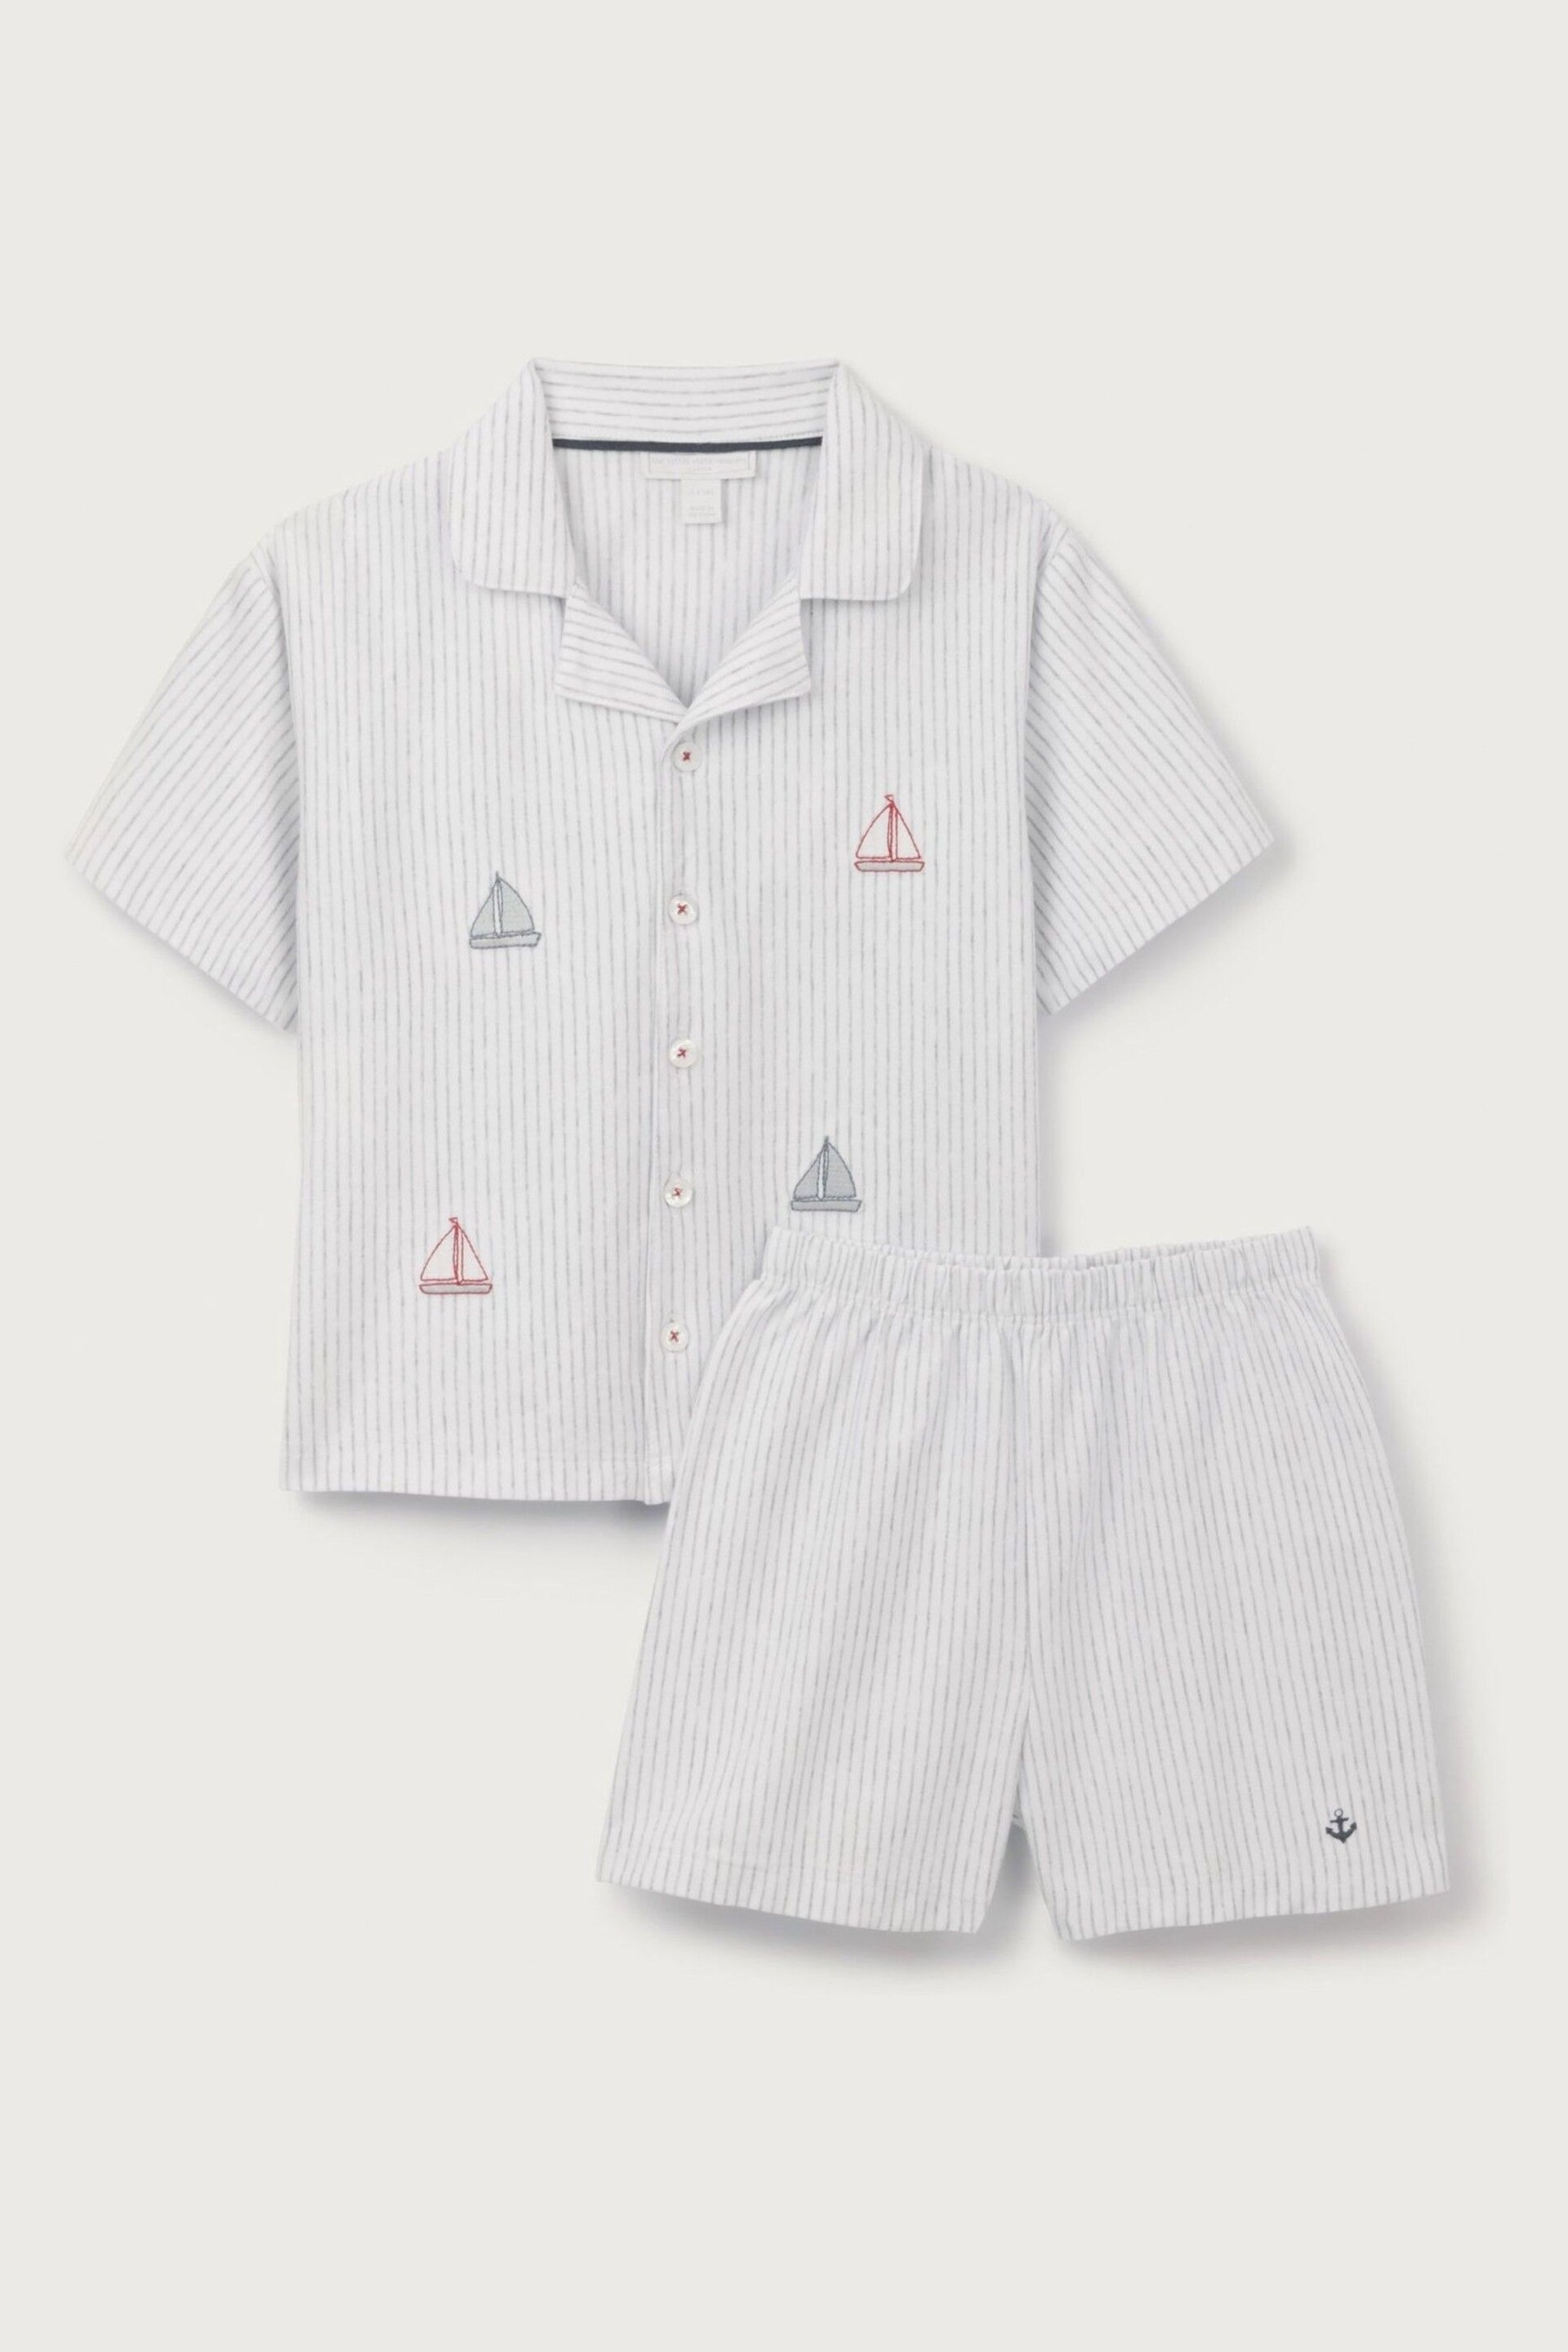 The White Company White Organic Cotton Classic Sailboat Embroidered Shortie Pyjama - Image 4 of 6